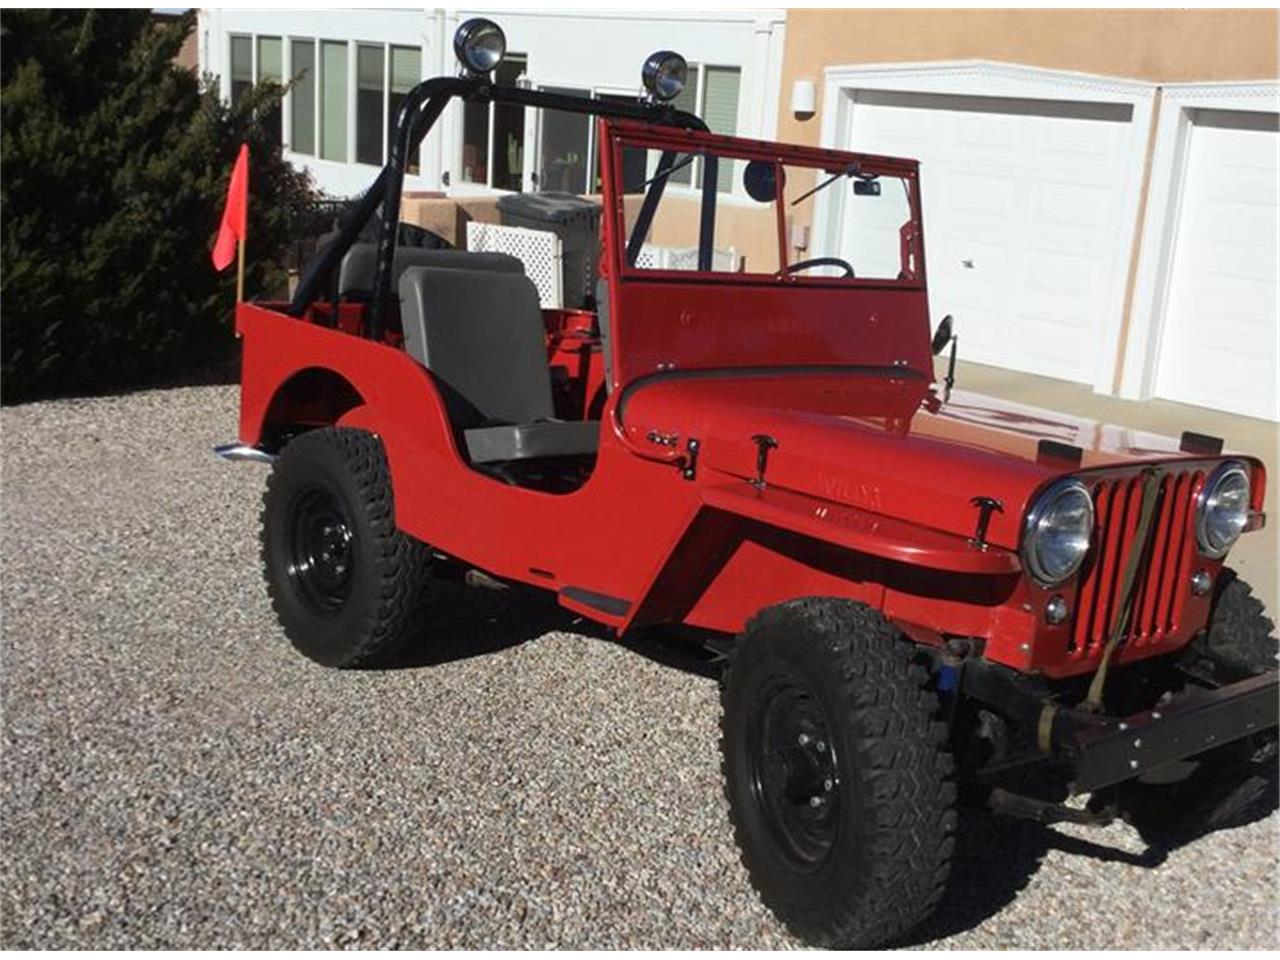 1946 Willys CJ2 for sale in Placitas, NM